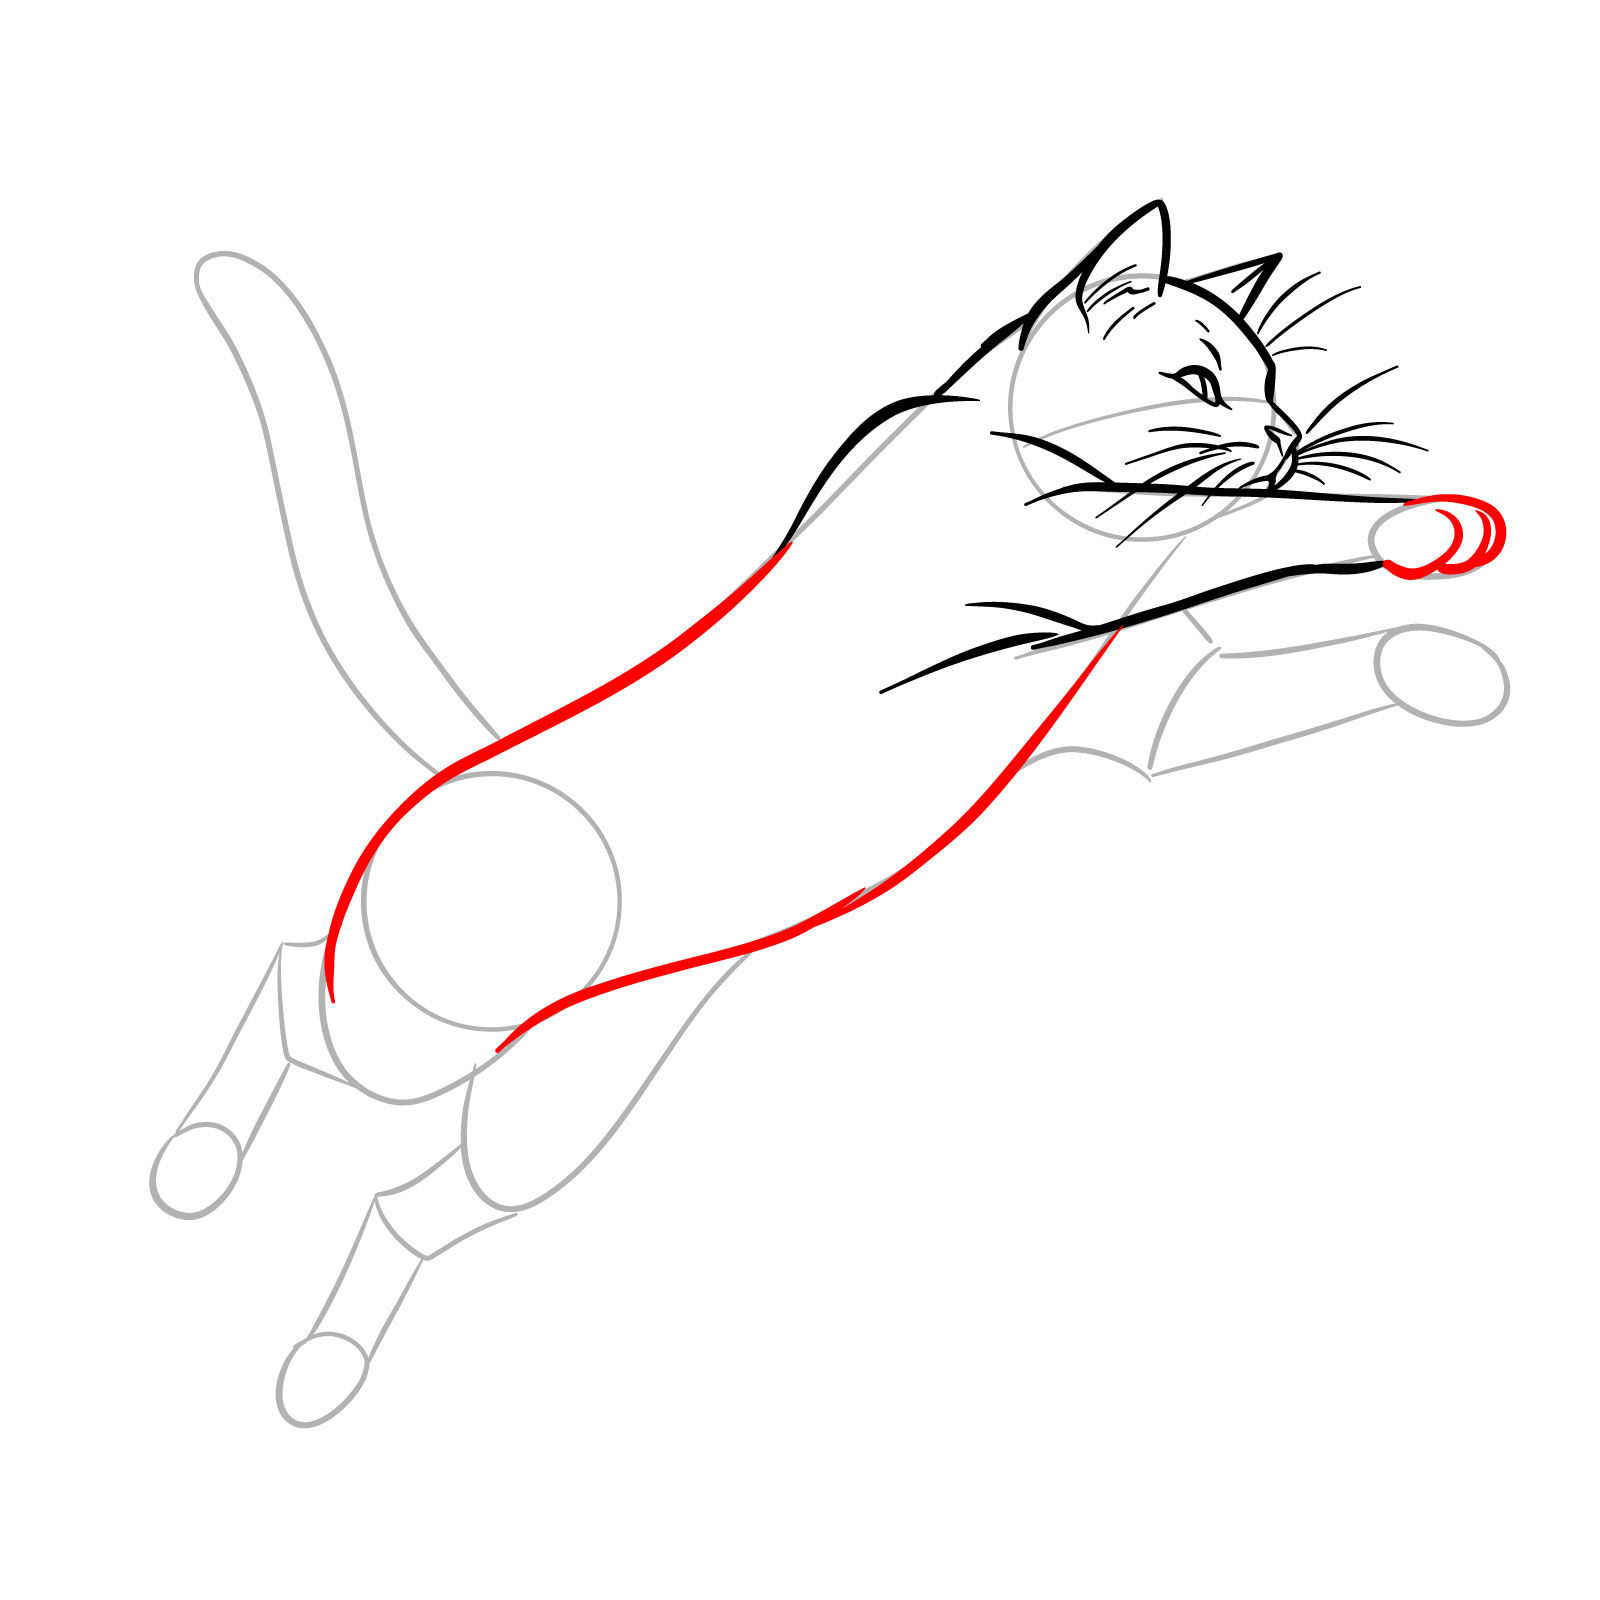 Sketch of a cat in mid-jump, detailing the paw and the fluid line of the body extending to the hind leg - step 09